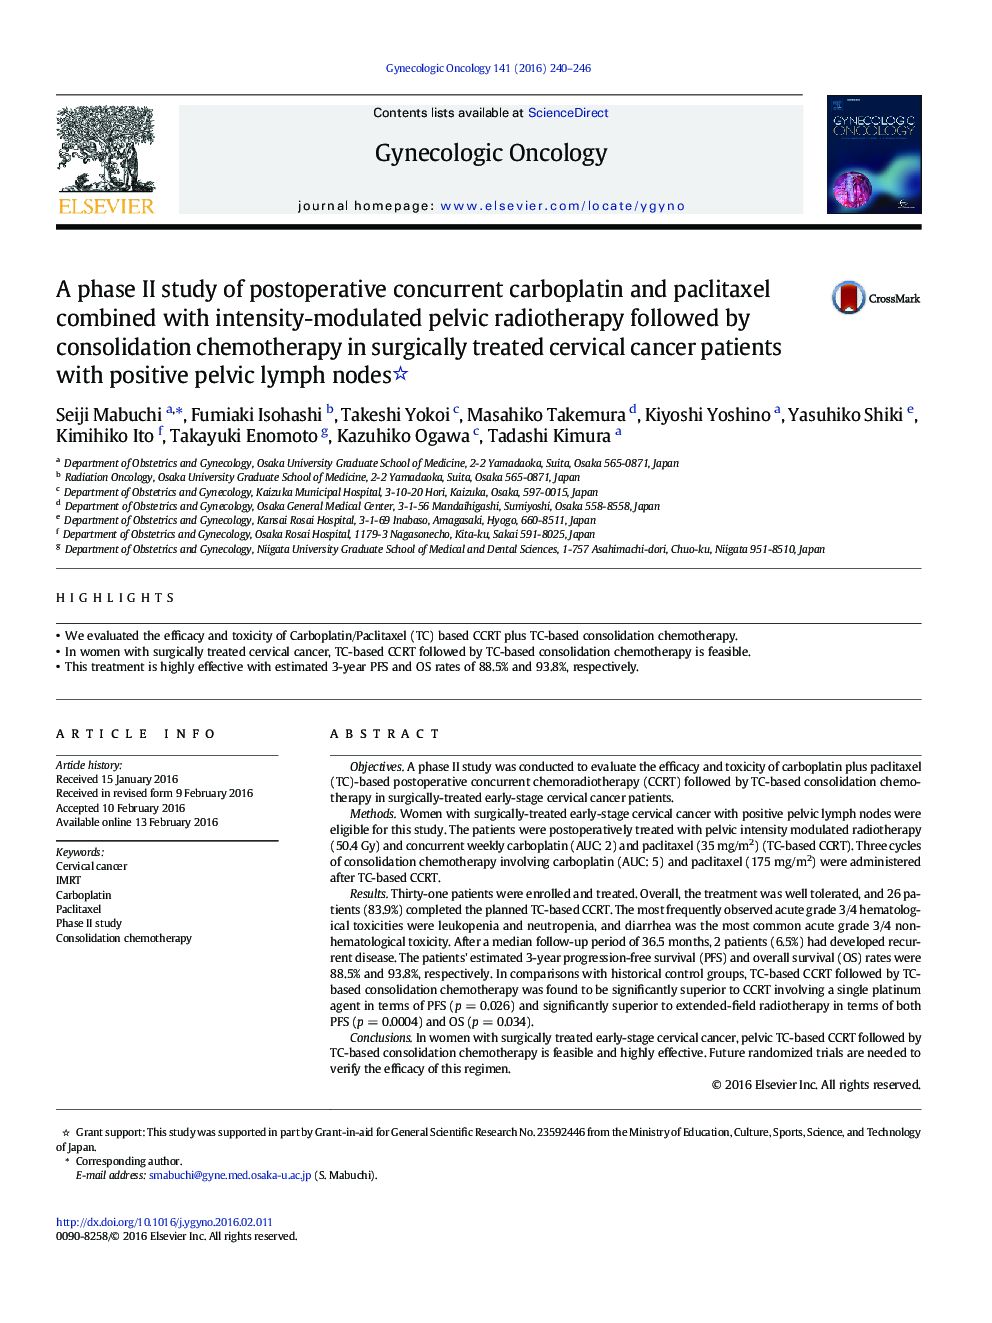 A phase II study of postoperative concurrent carboplatin and paclitaxel combined with intensity-modulated pelvic radiotherapy followed by consolidation chemotherapy in surgically treated cervical cancer patients with positive pelvic lymph nodes